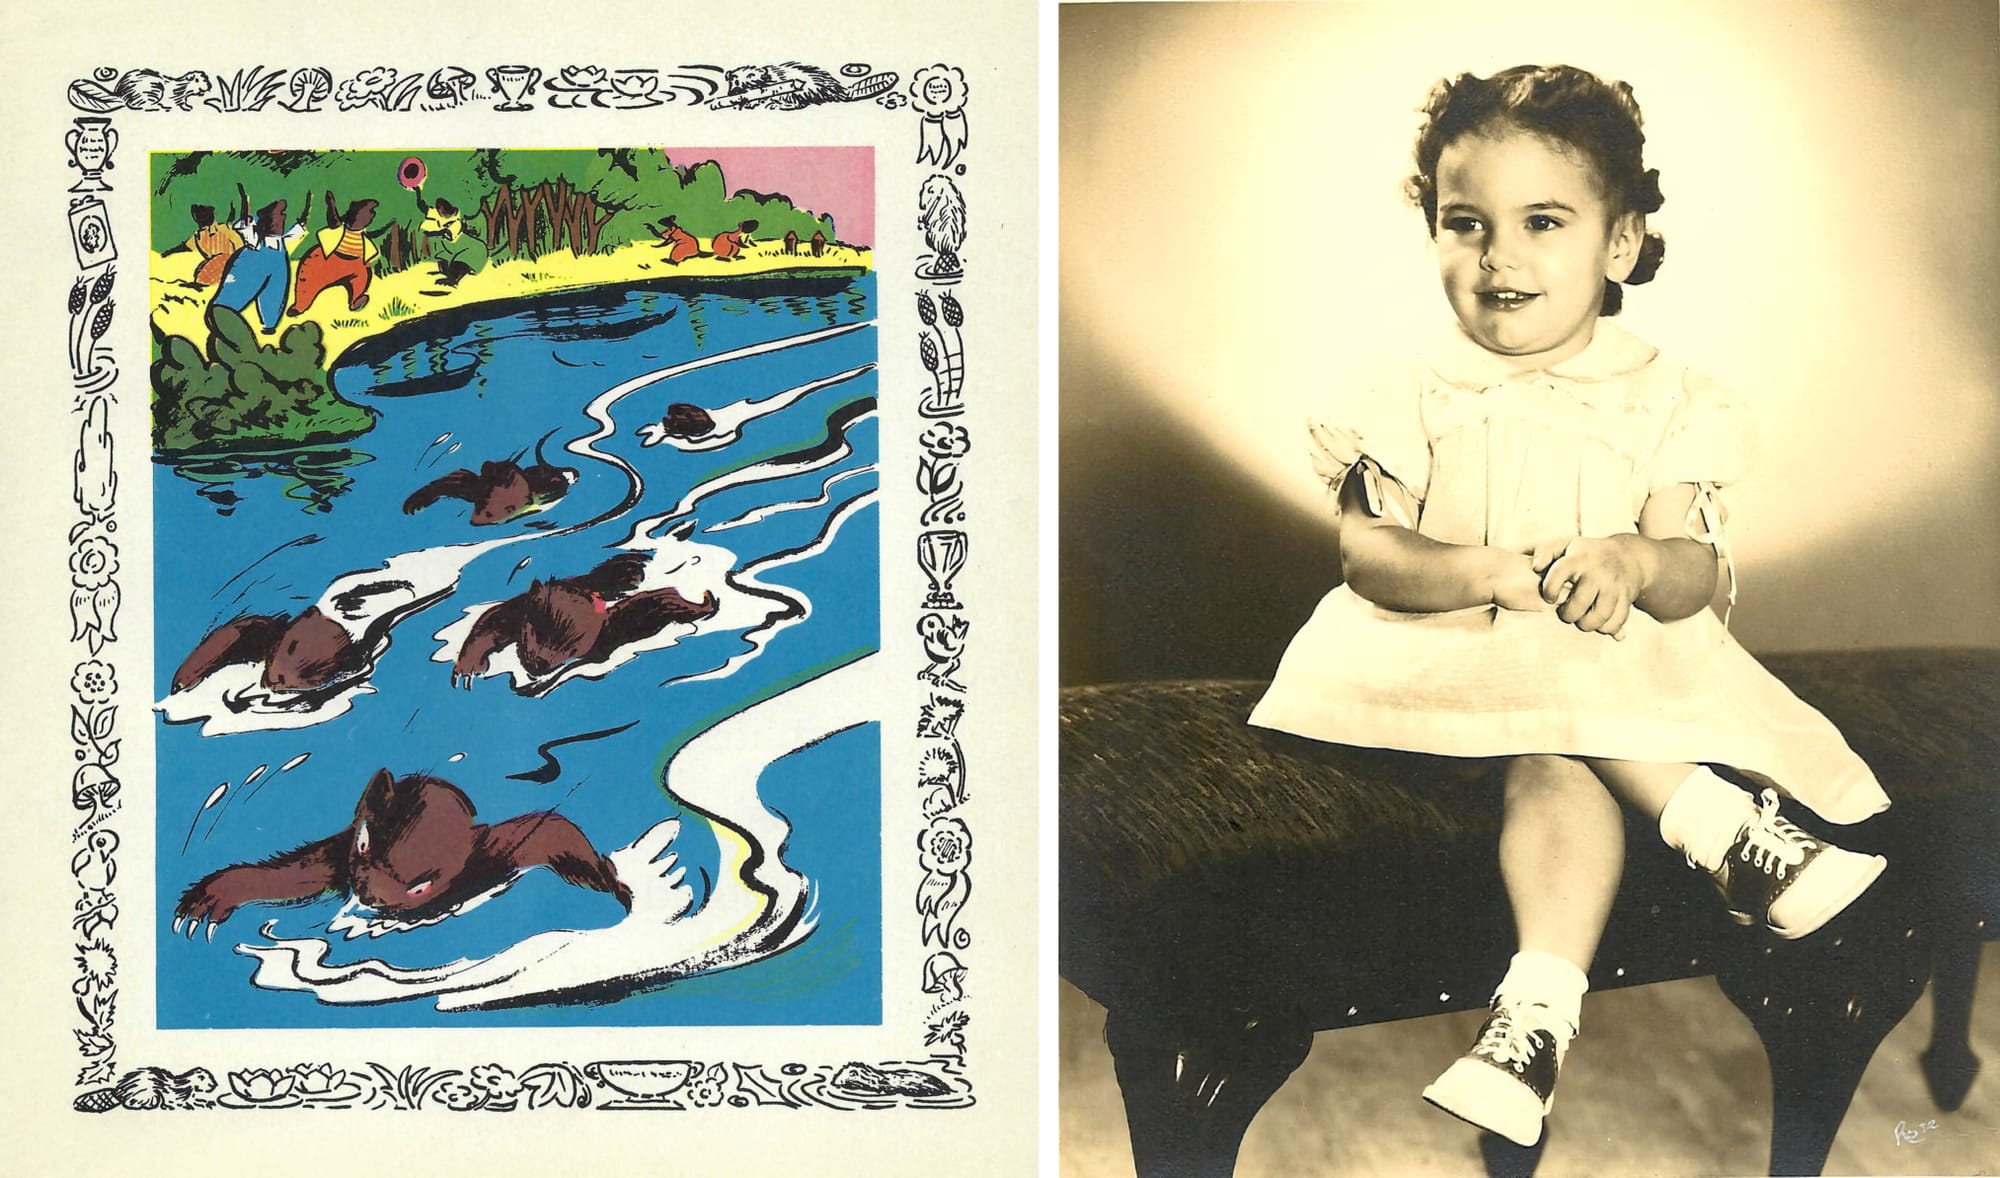 (left) Book illustration of 5 beavers swimming downriver; (right) photo of Sandra Dean at age 3, sitting on chair in white dress with legs crossed.